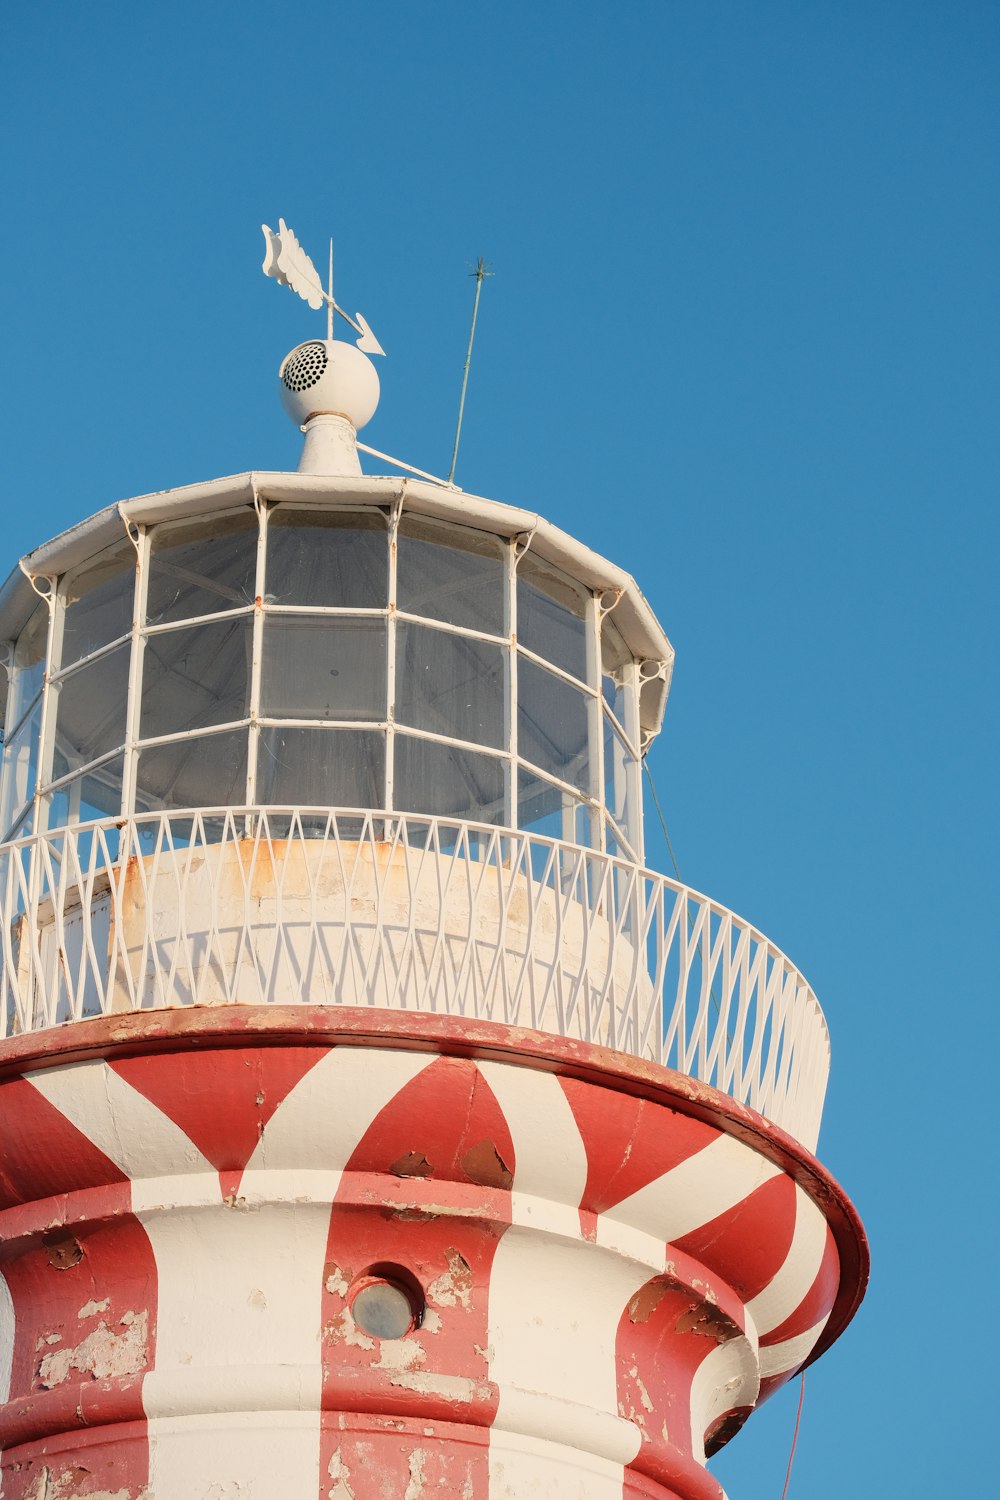 a red and white lighthouse with a bird on top